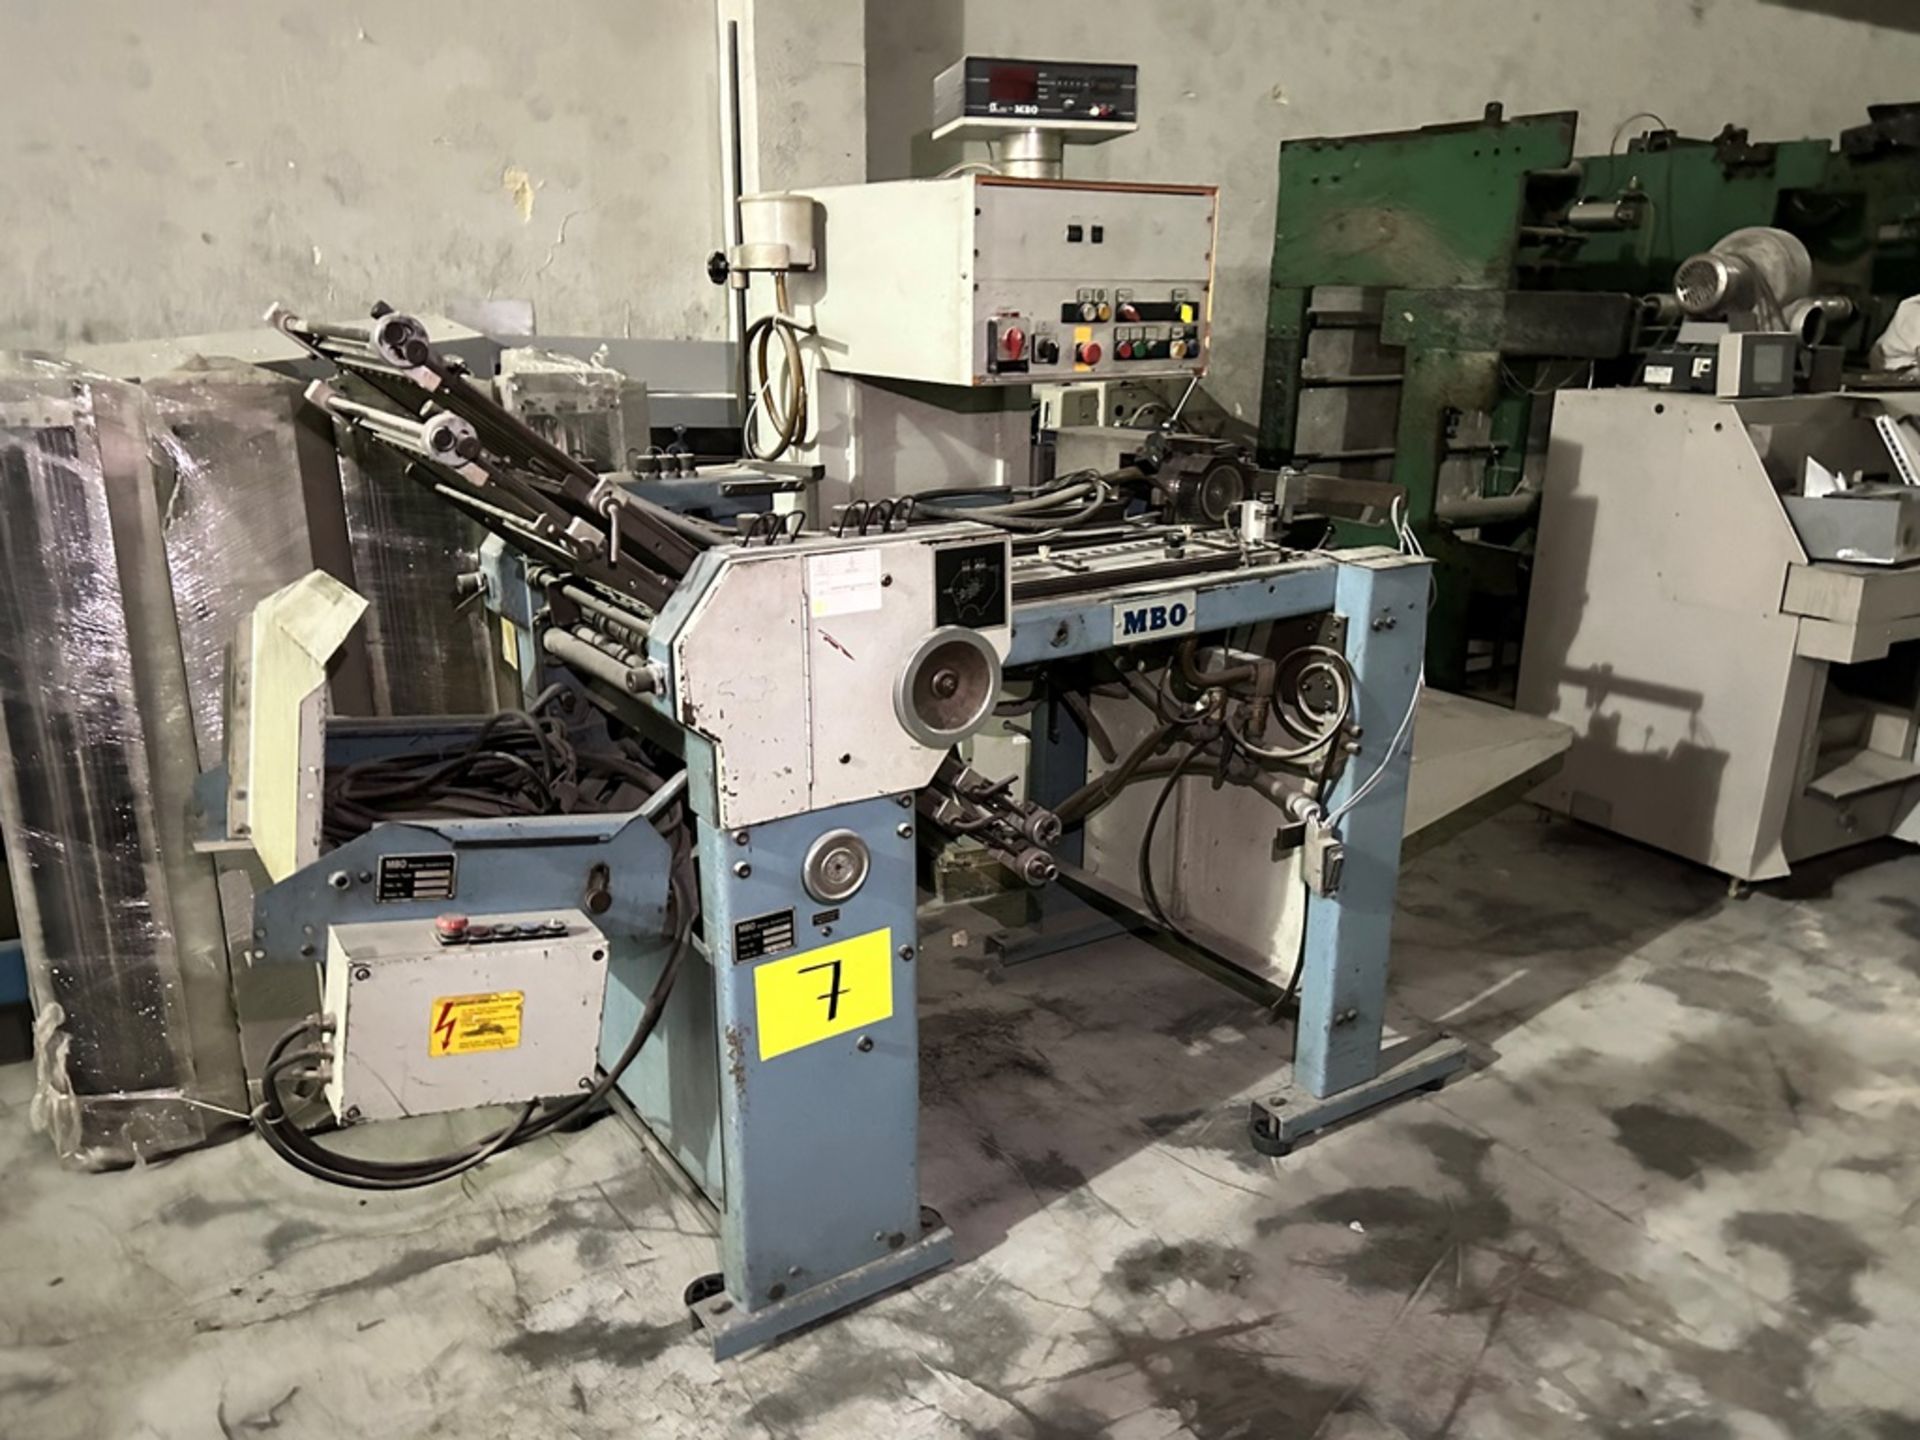 MBO 750 x 520 mm format folding machine, Model T52, Serial No. 890911935, Year 1984, 220V, 4 folds, - Image 2 of 9